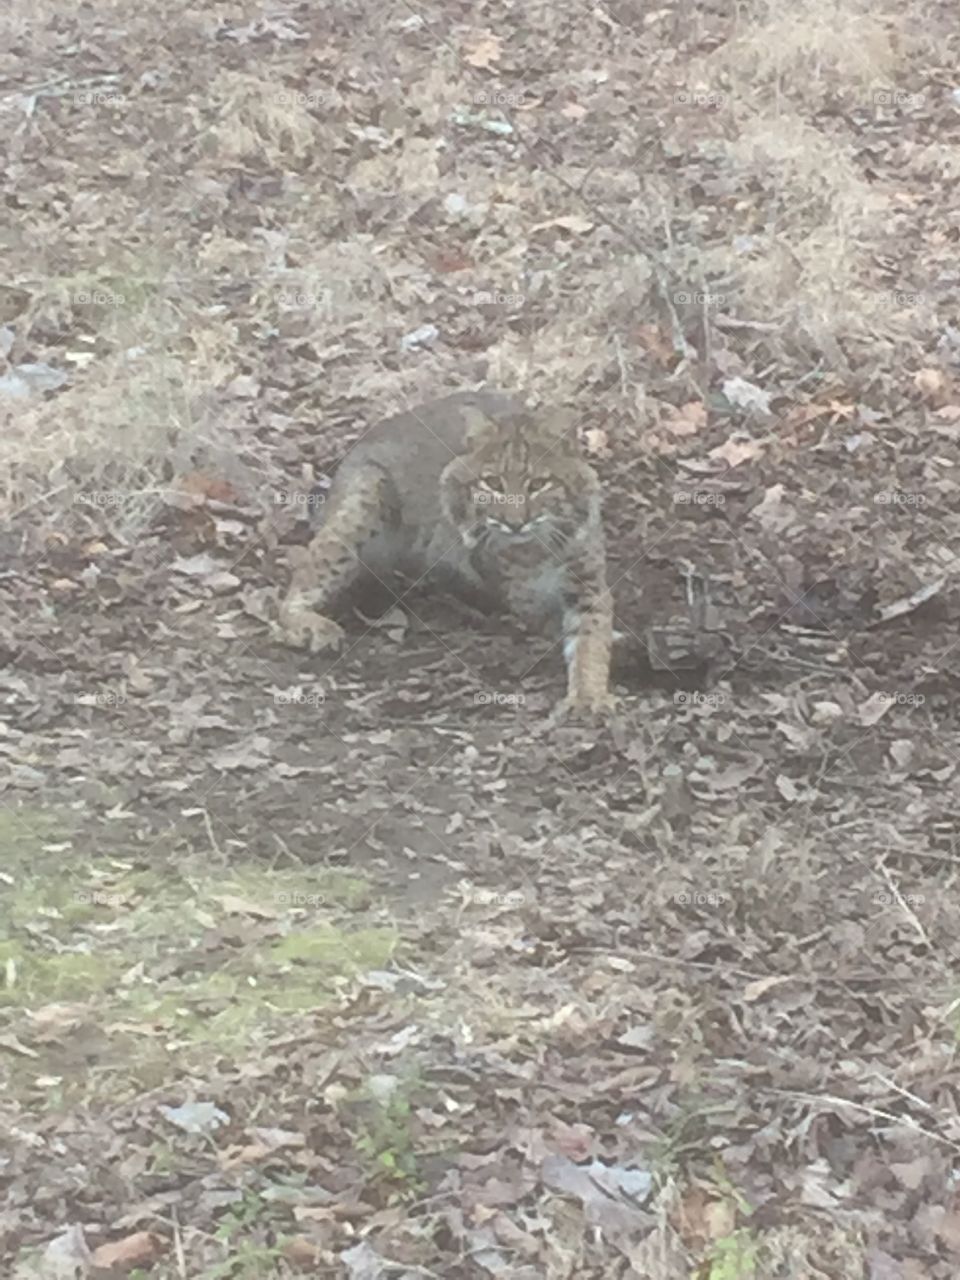 Trapped Bobcat